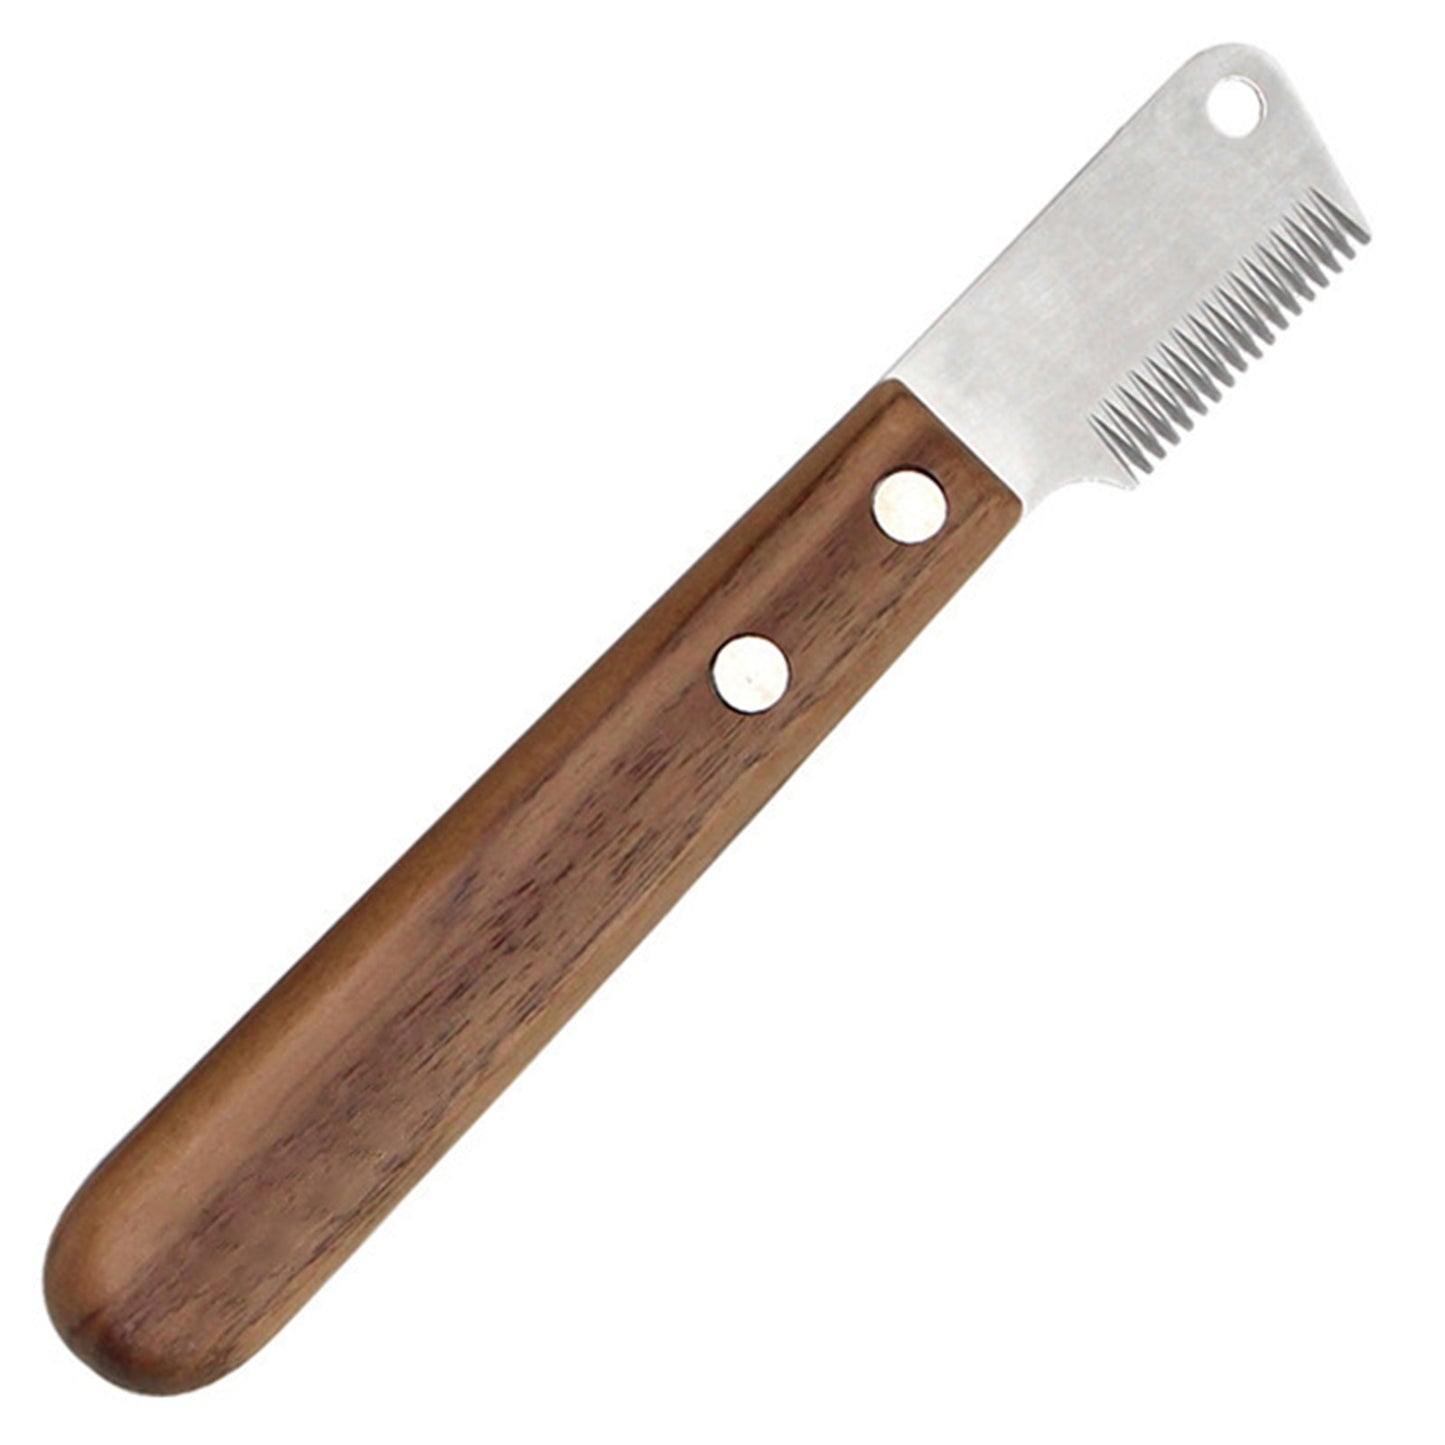 Handle Dog Stainless Steel Brushes Grooming Combs